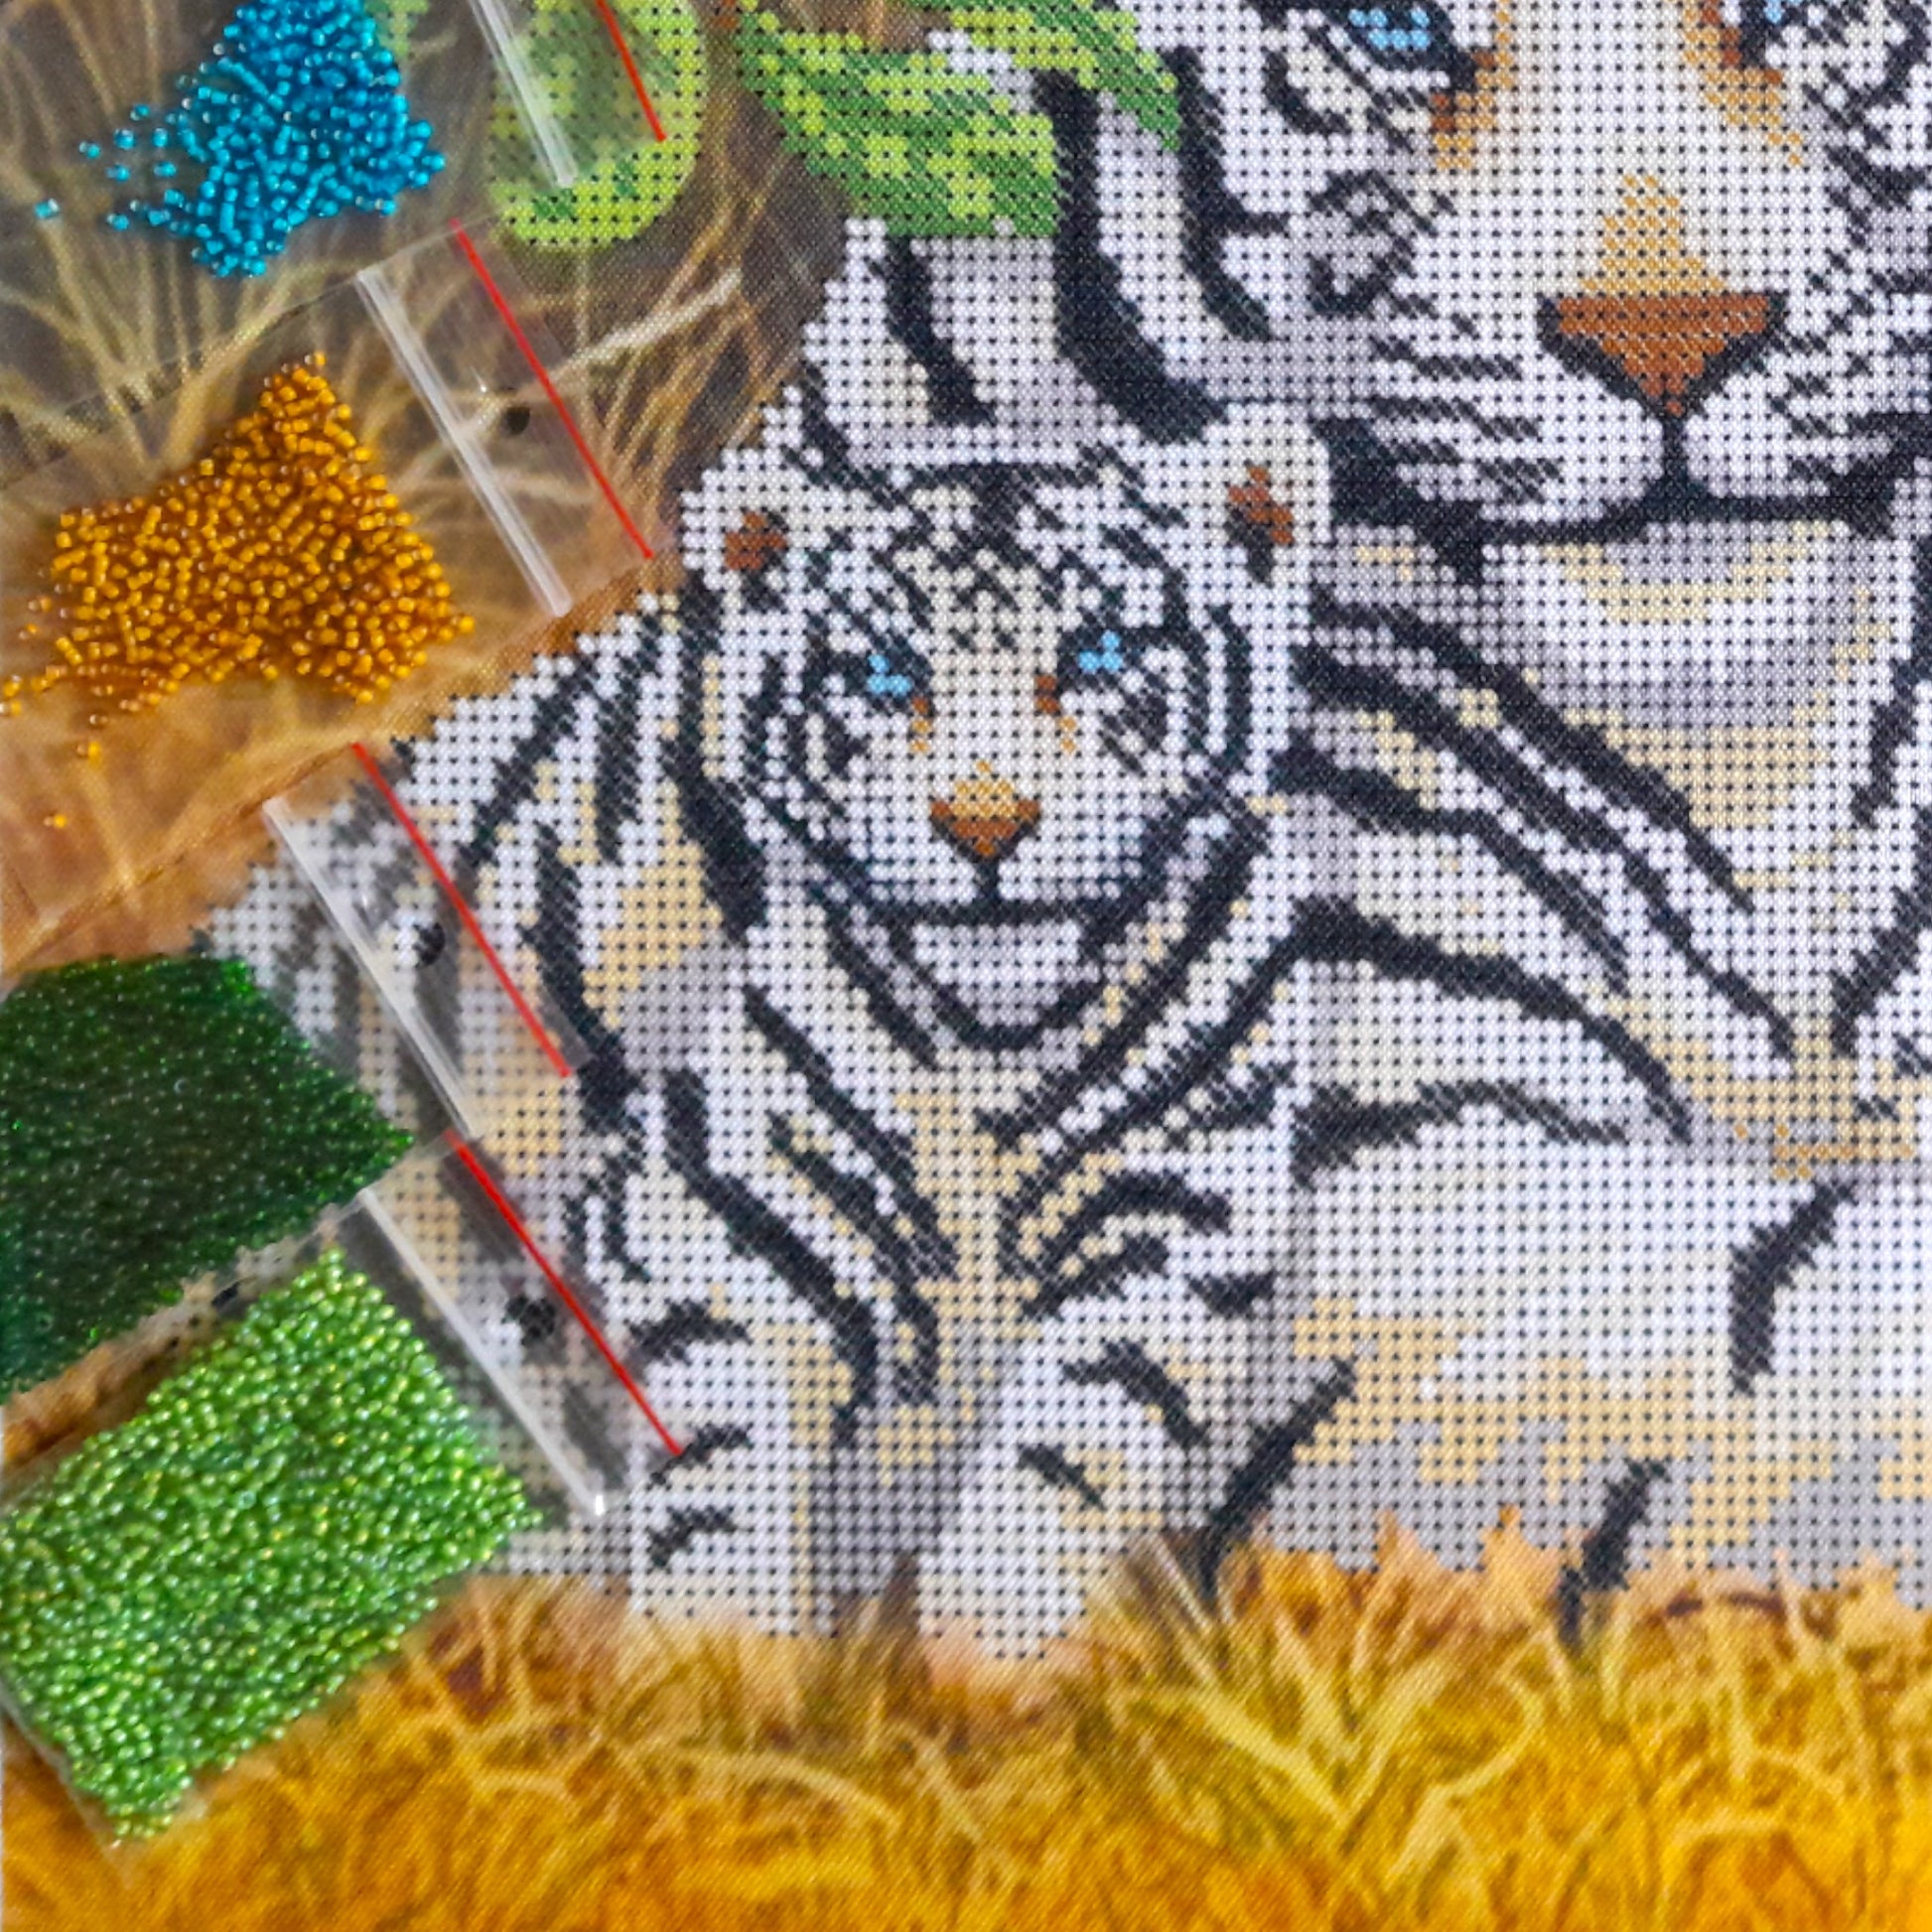 DIY Bead embroidery kit "Tigers". Size: 15.7-11in (40-28.7cm) - VadymShop